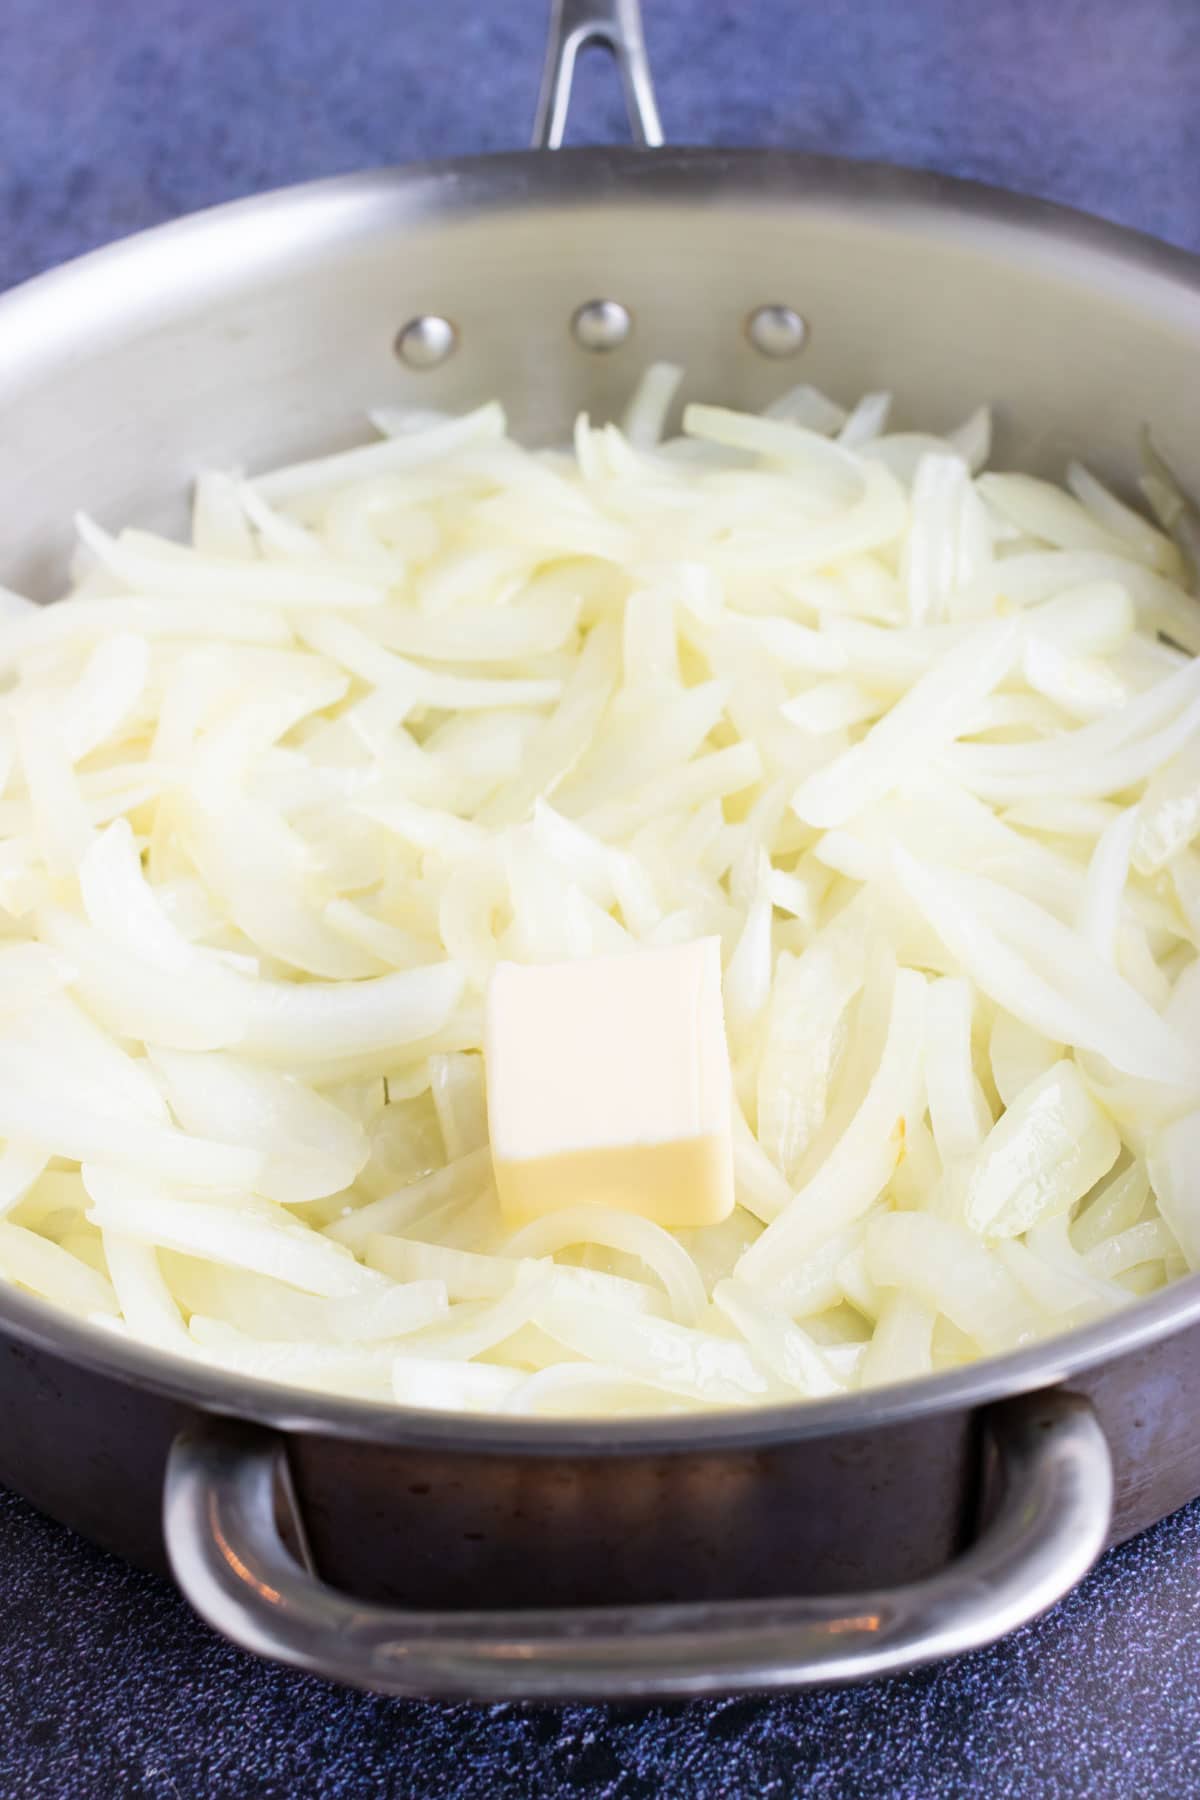 An image showing butter being added to partially cooked onions in a skillet.